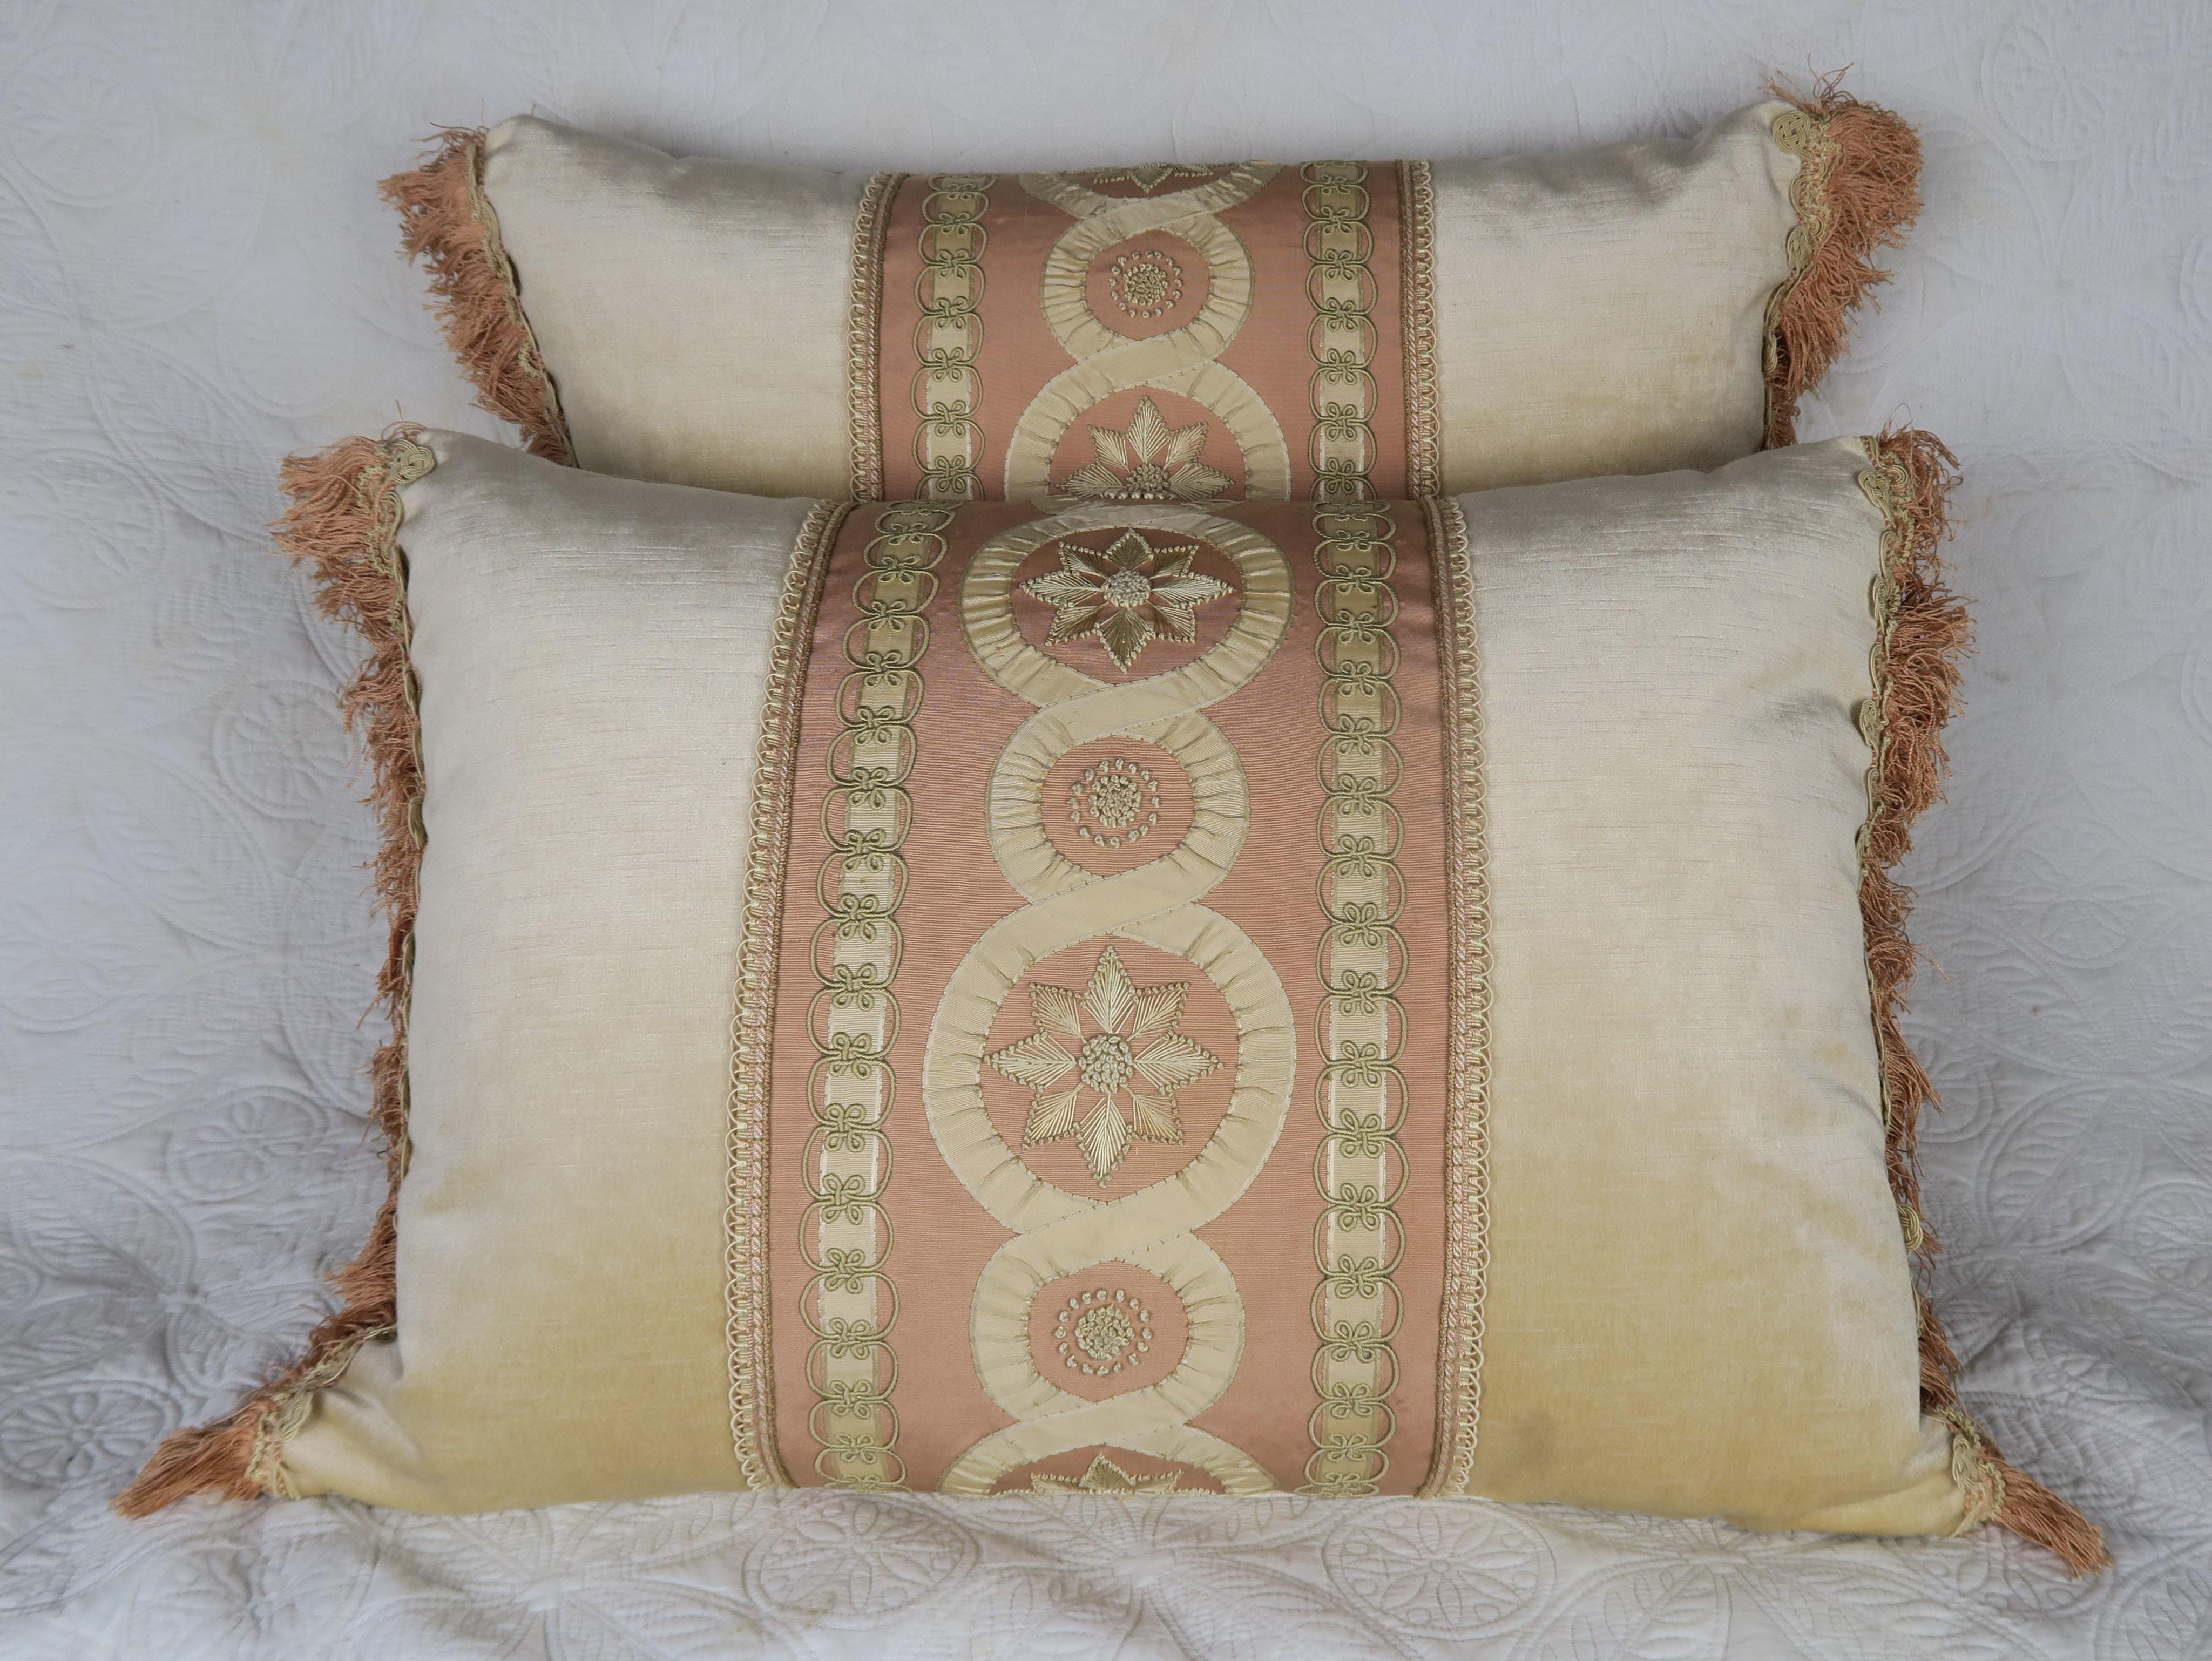 Pair of custom pillows made by Melissa Levinson using 19th century embroidered and appliqued silk panels that were combined with contemporary cream colored velvet fronts and backs. Antique trim is seen at sides of pillows. Down and feather inserts,